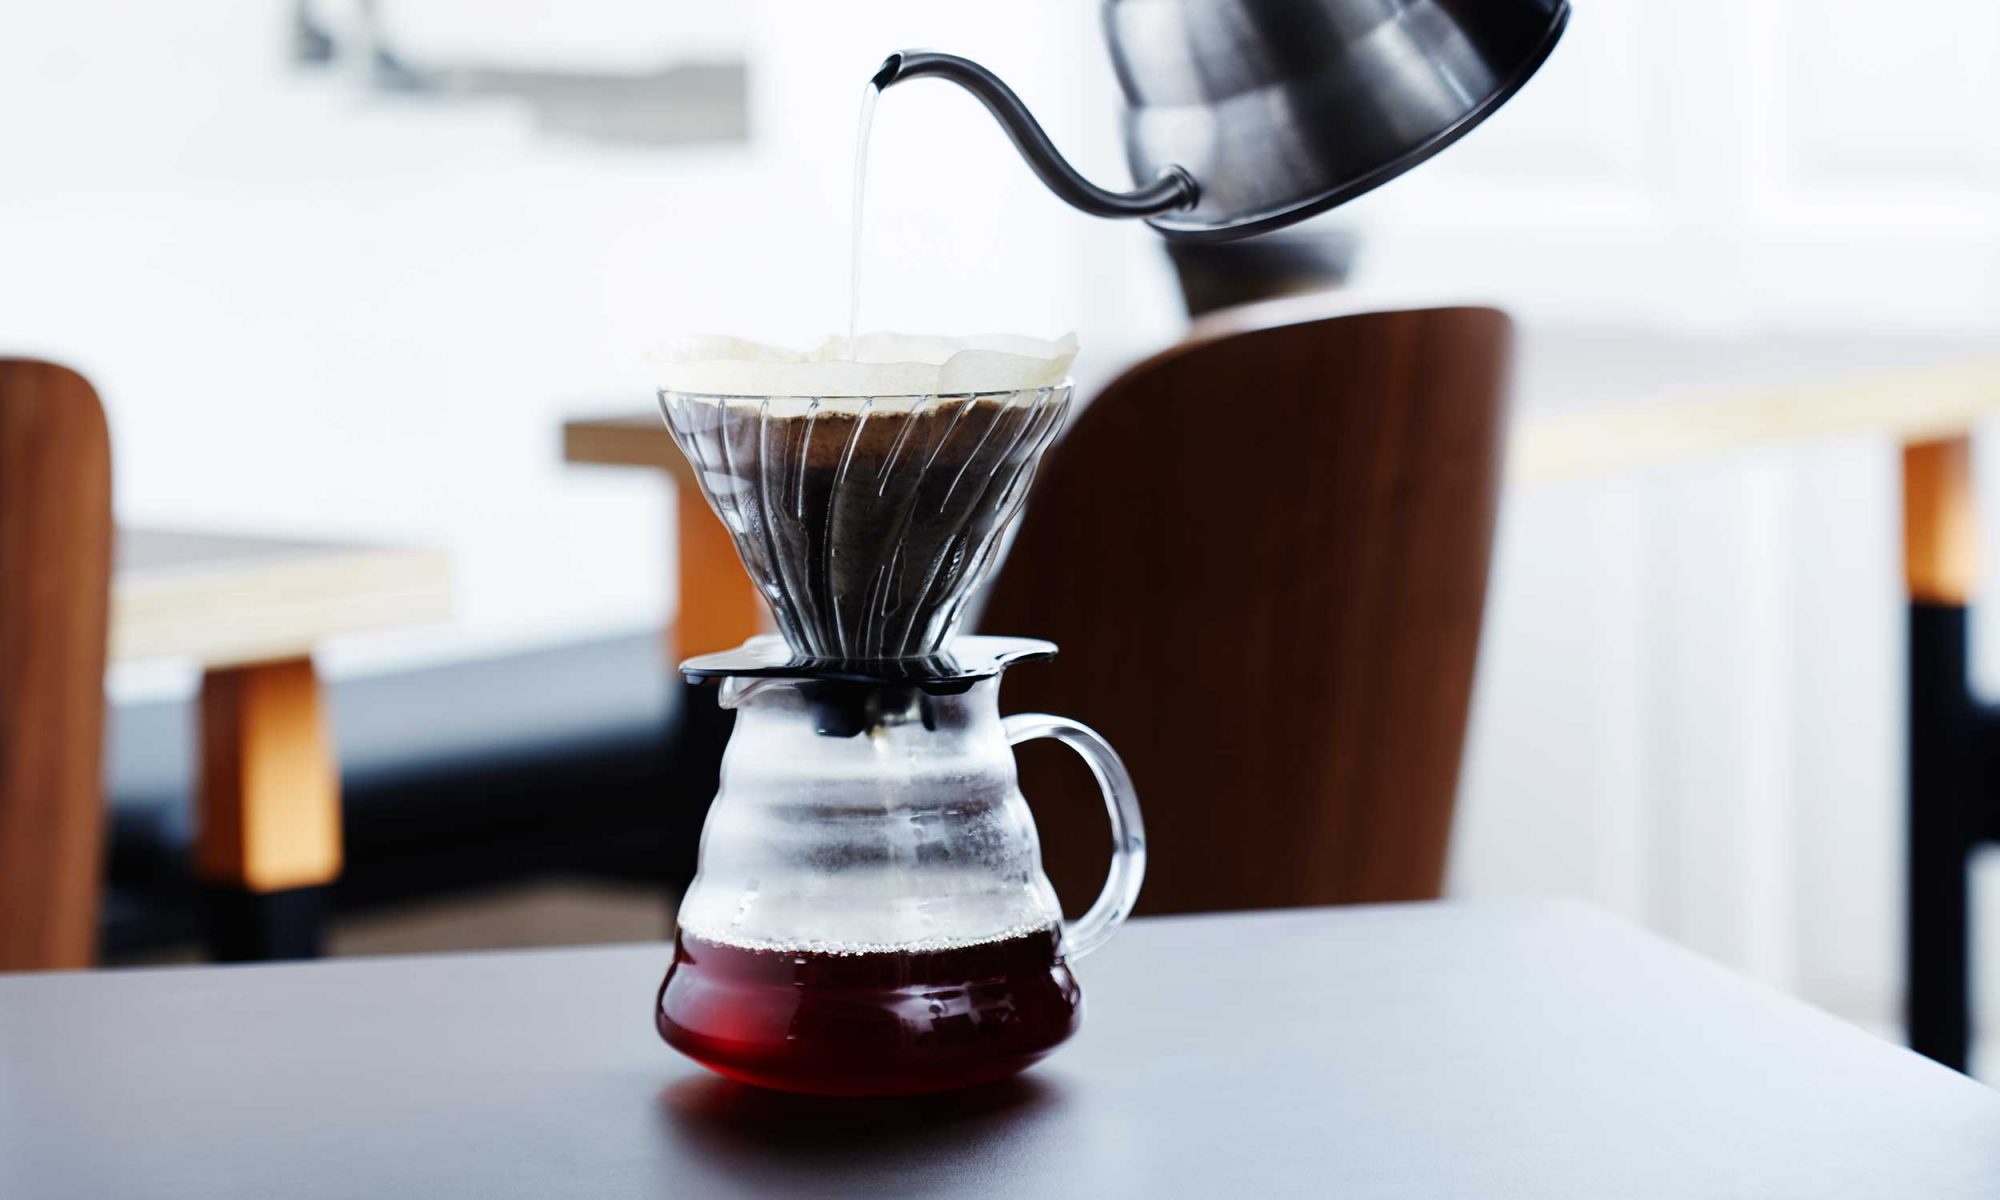 A Beginner's Guide to Making Pour-Over Coffee at Home